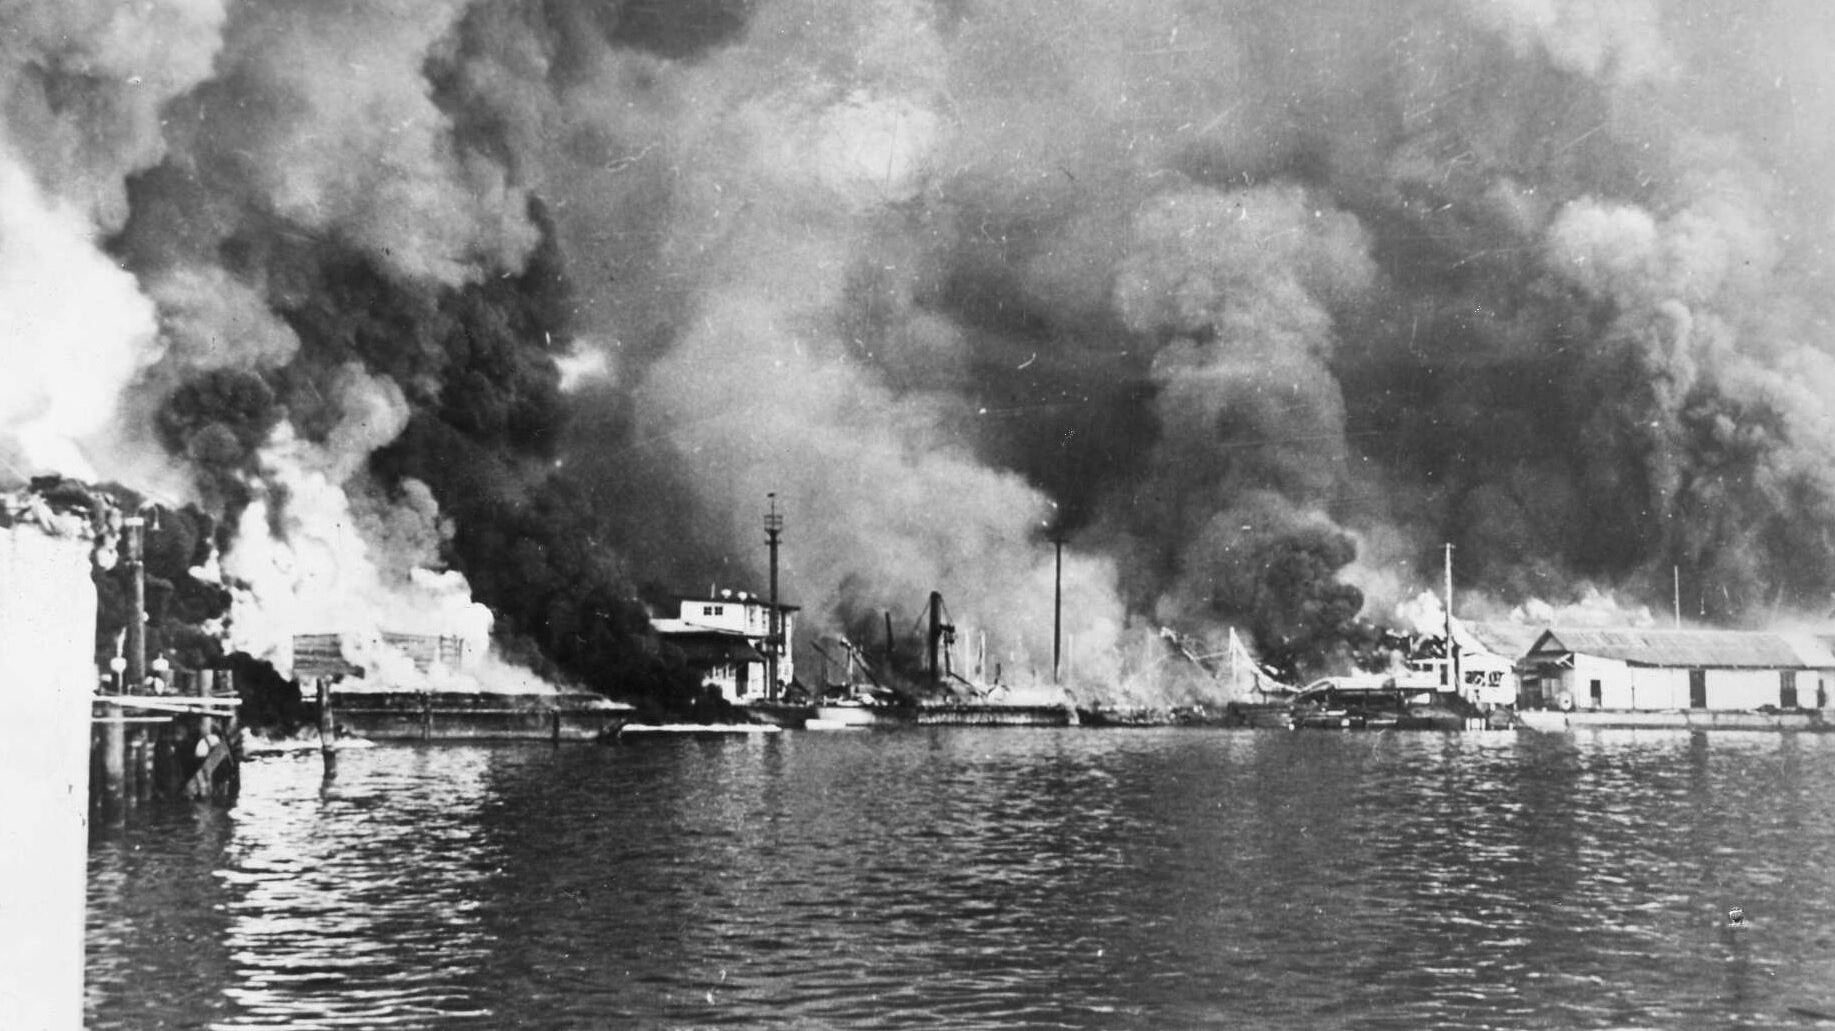 Under attack five days after Pearl Harbor, shore installations and U.S. Navy barges at Cavite in the Philippines burn furiously following a Japanese air raid.